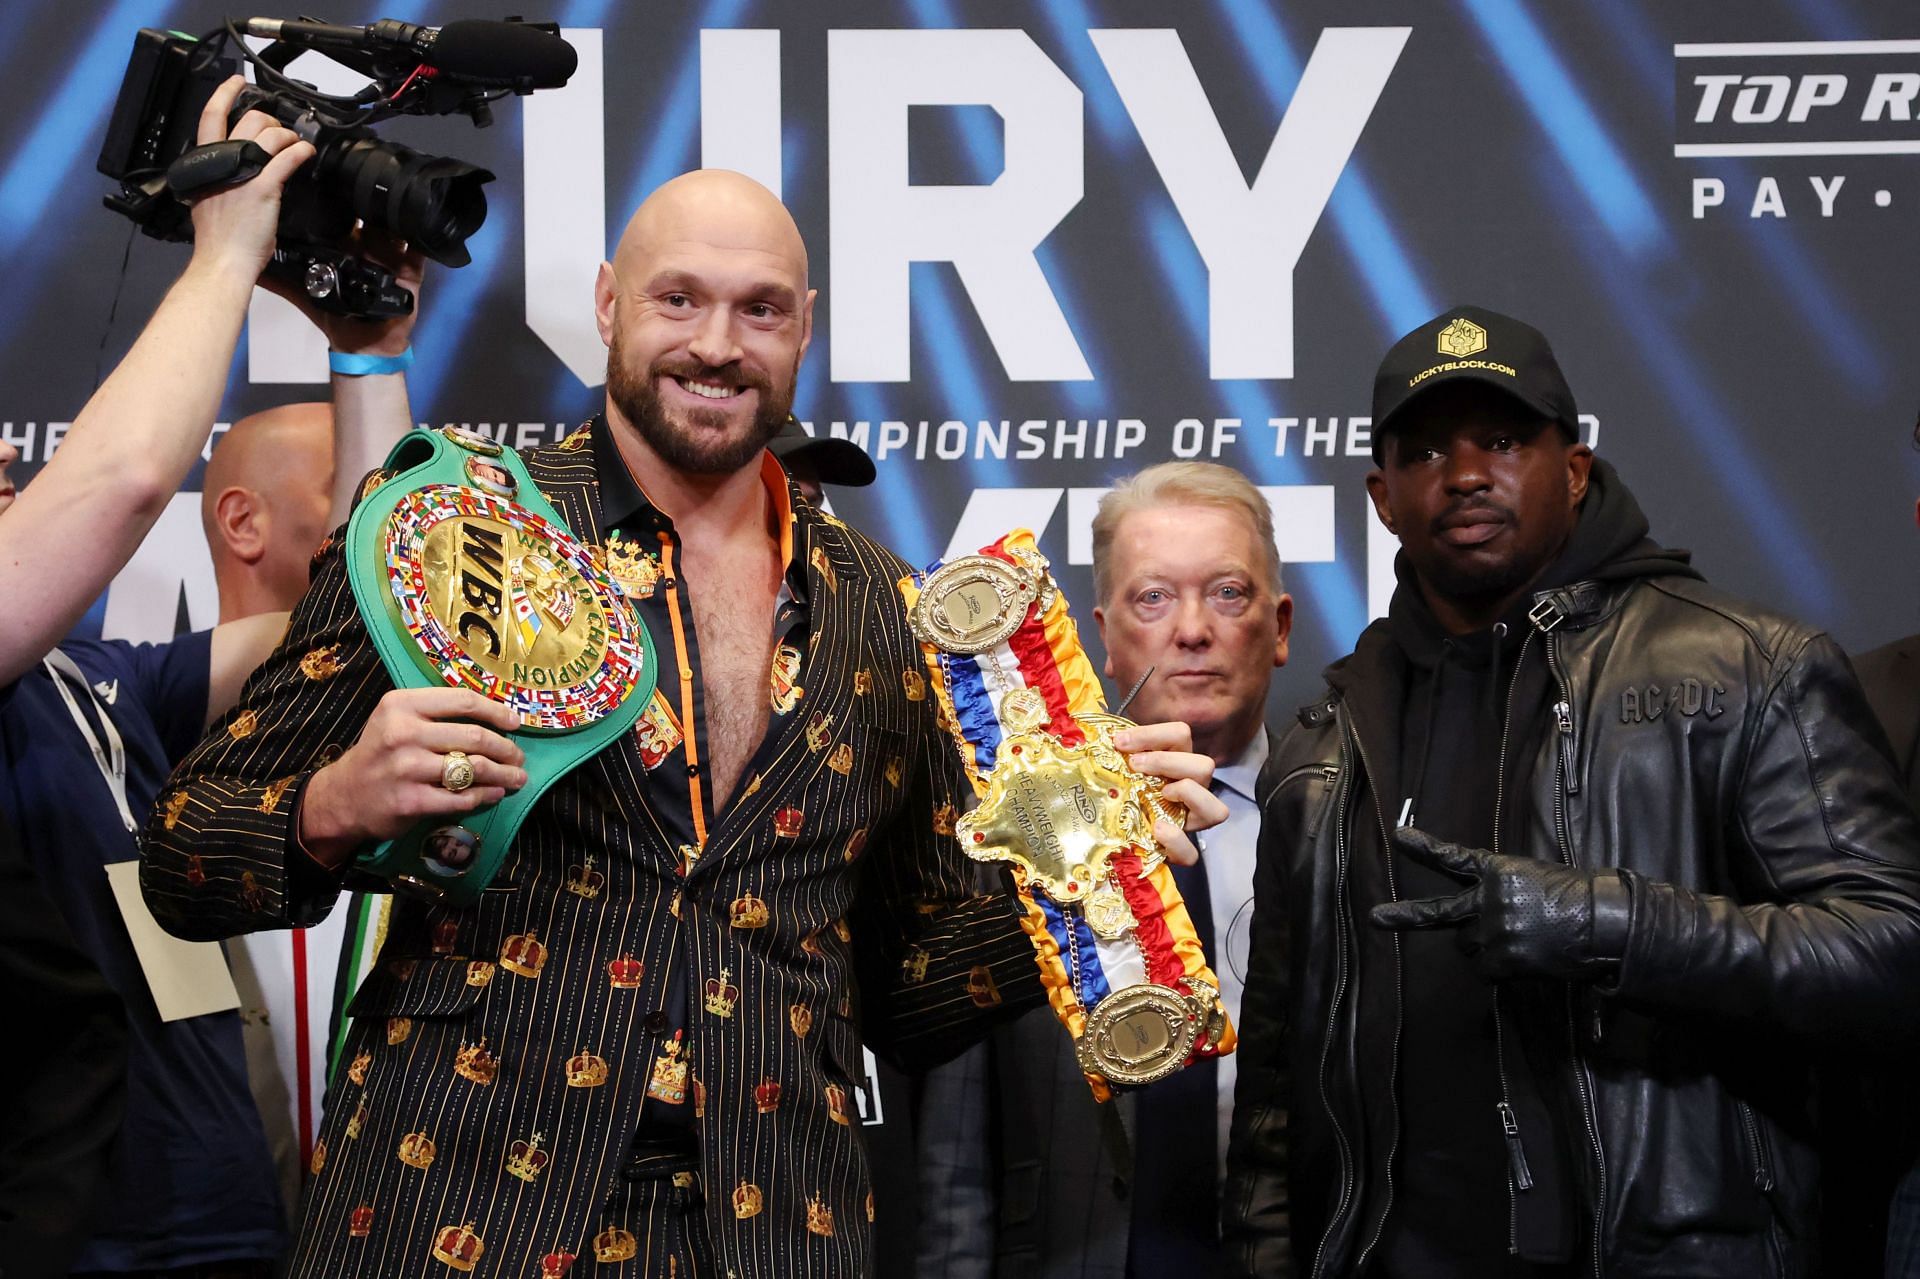 Tyson Fury (left), Frank Warren (center), and Dillian Whyte (right) [Images via Getty]